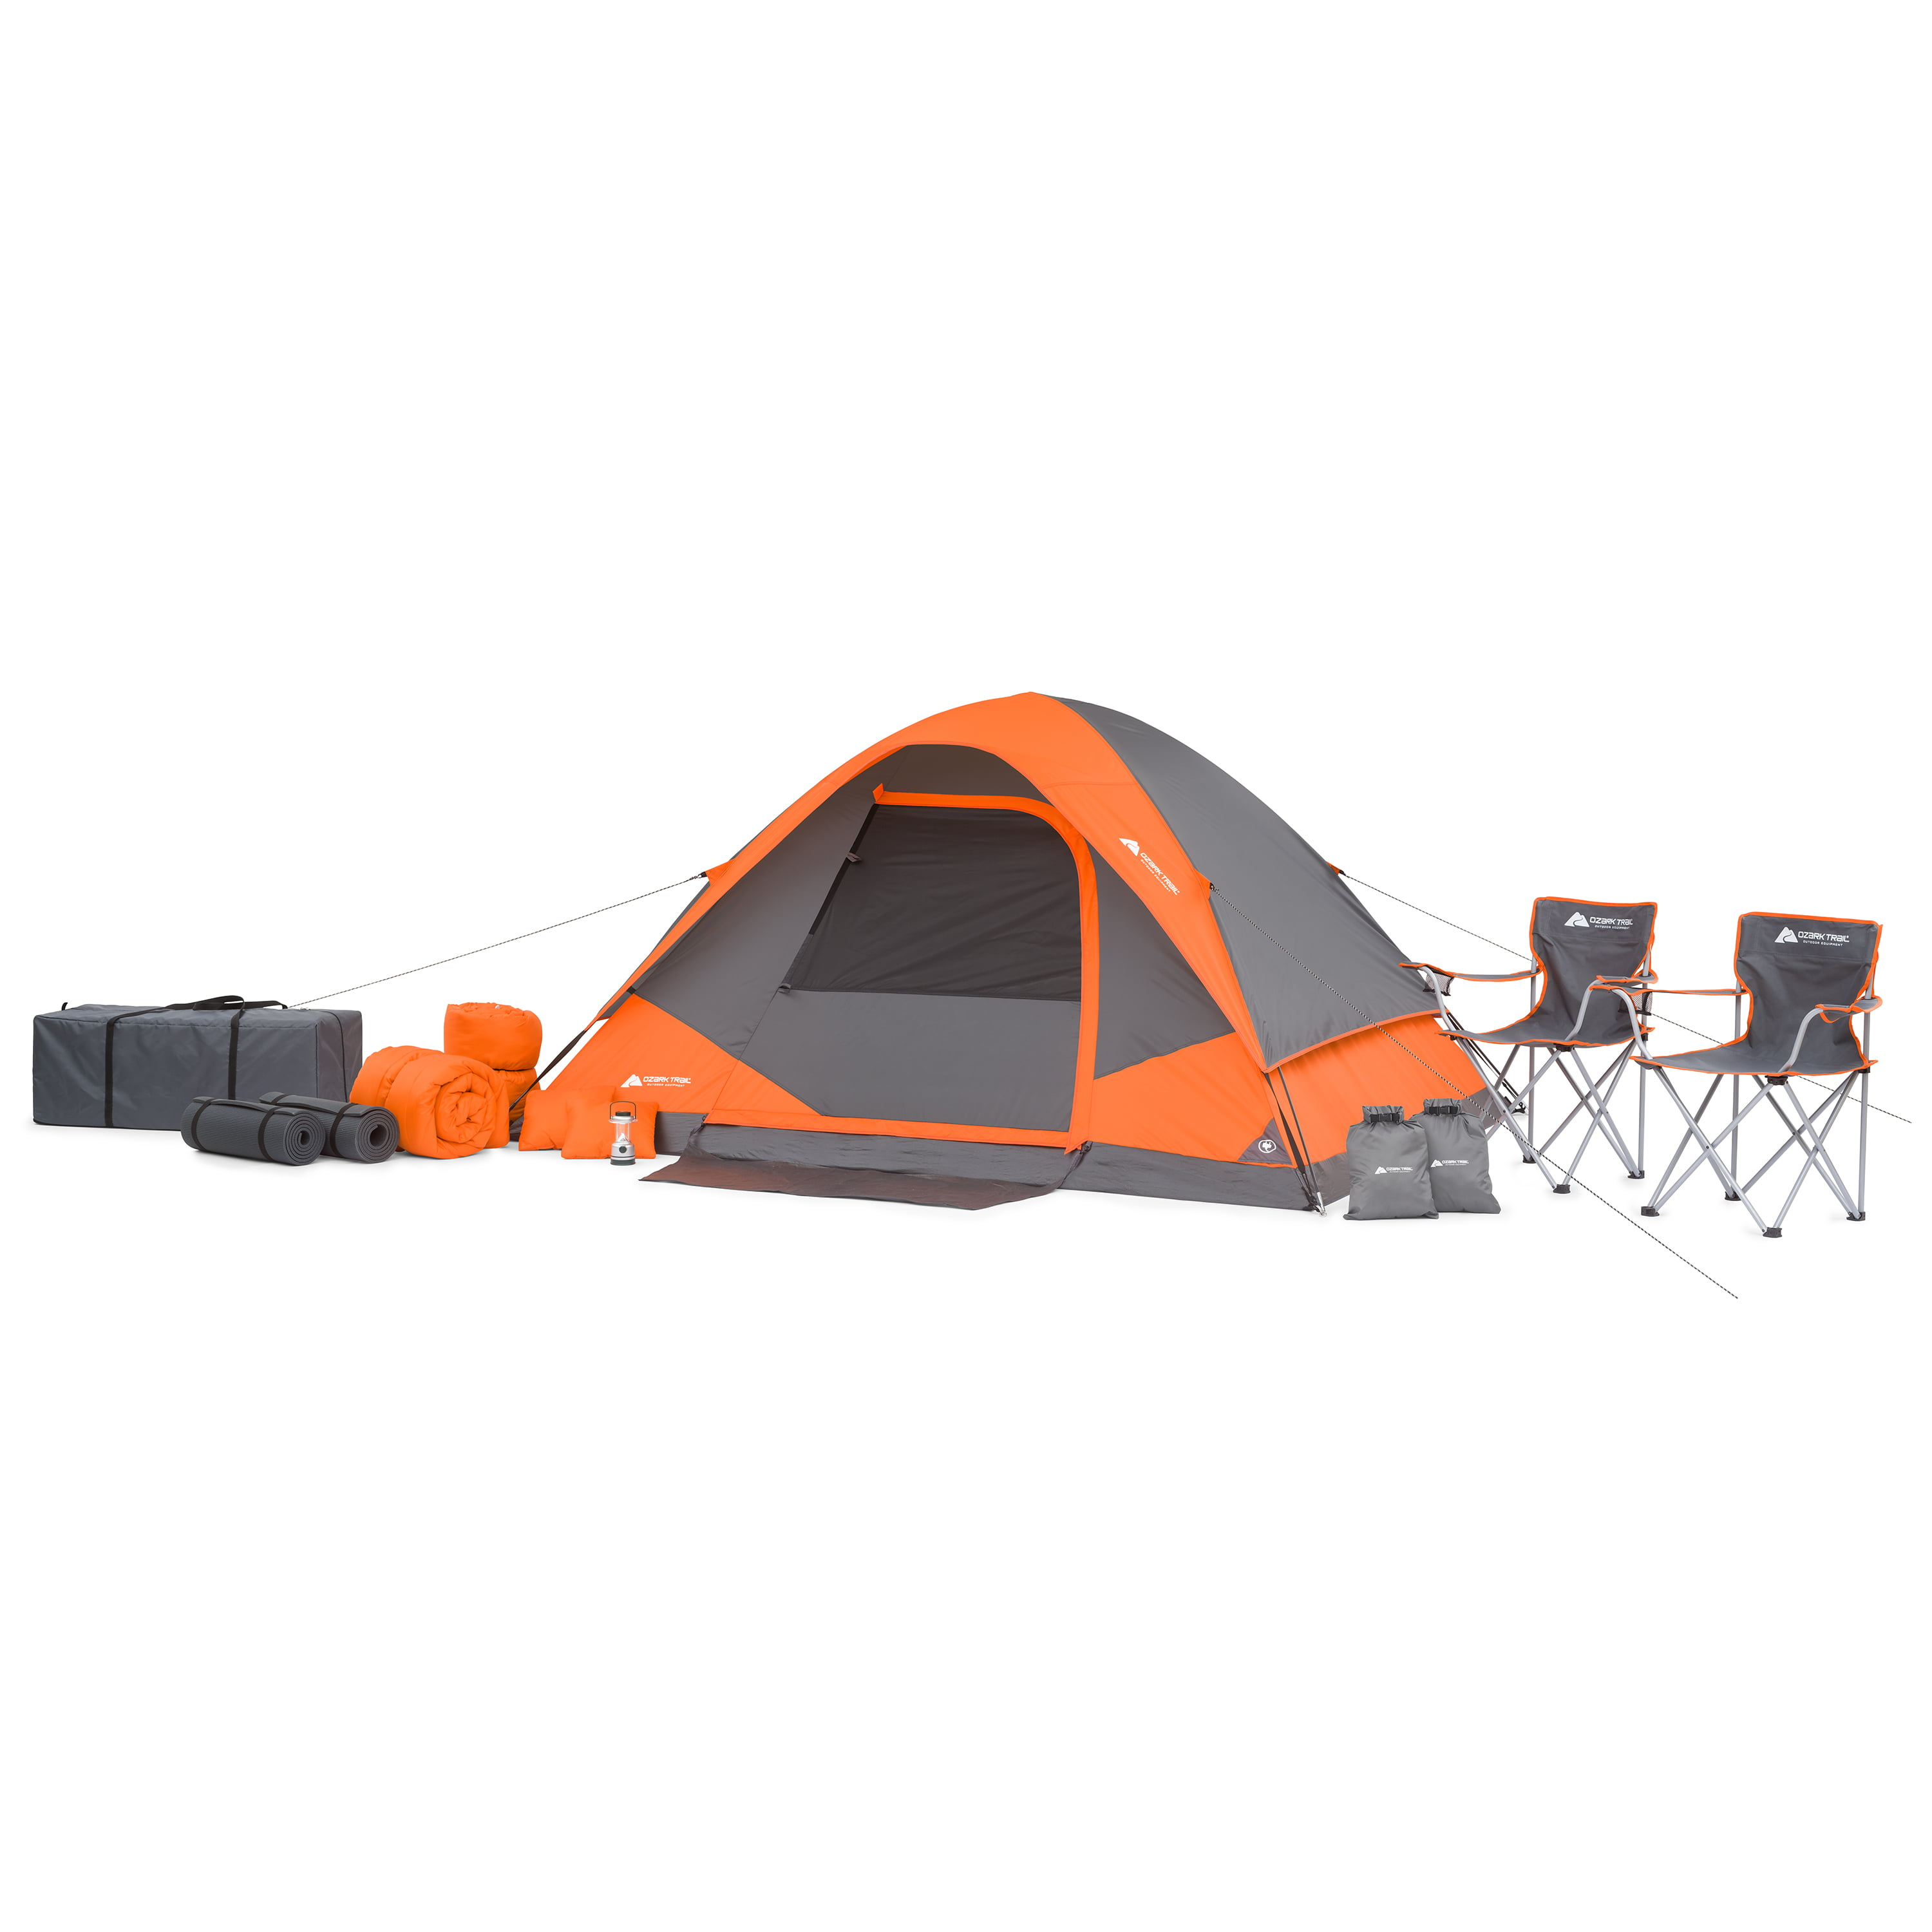 Ozark Trail 22-Piece Camping Tent Combo (Four-person tent with a gear loft, two sleeping bags, two chairs, an LED lantern, a carryall bag, and more) $99.00